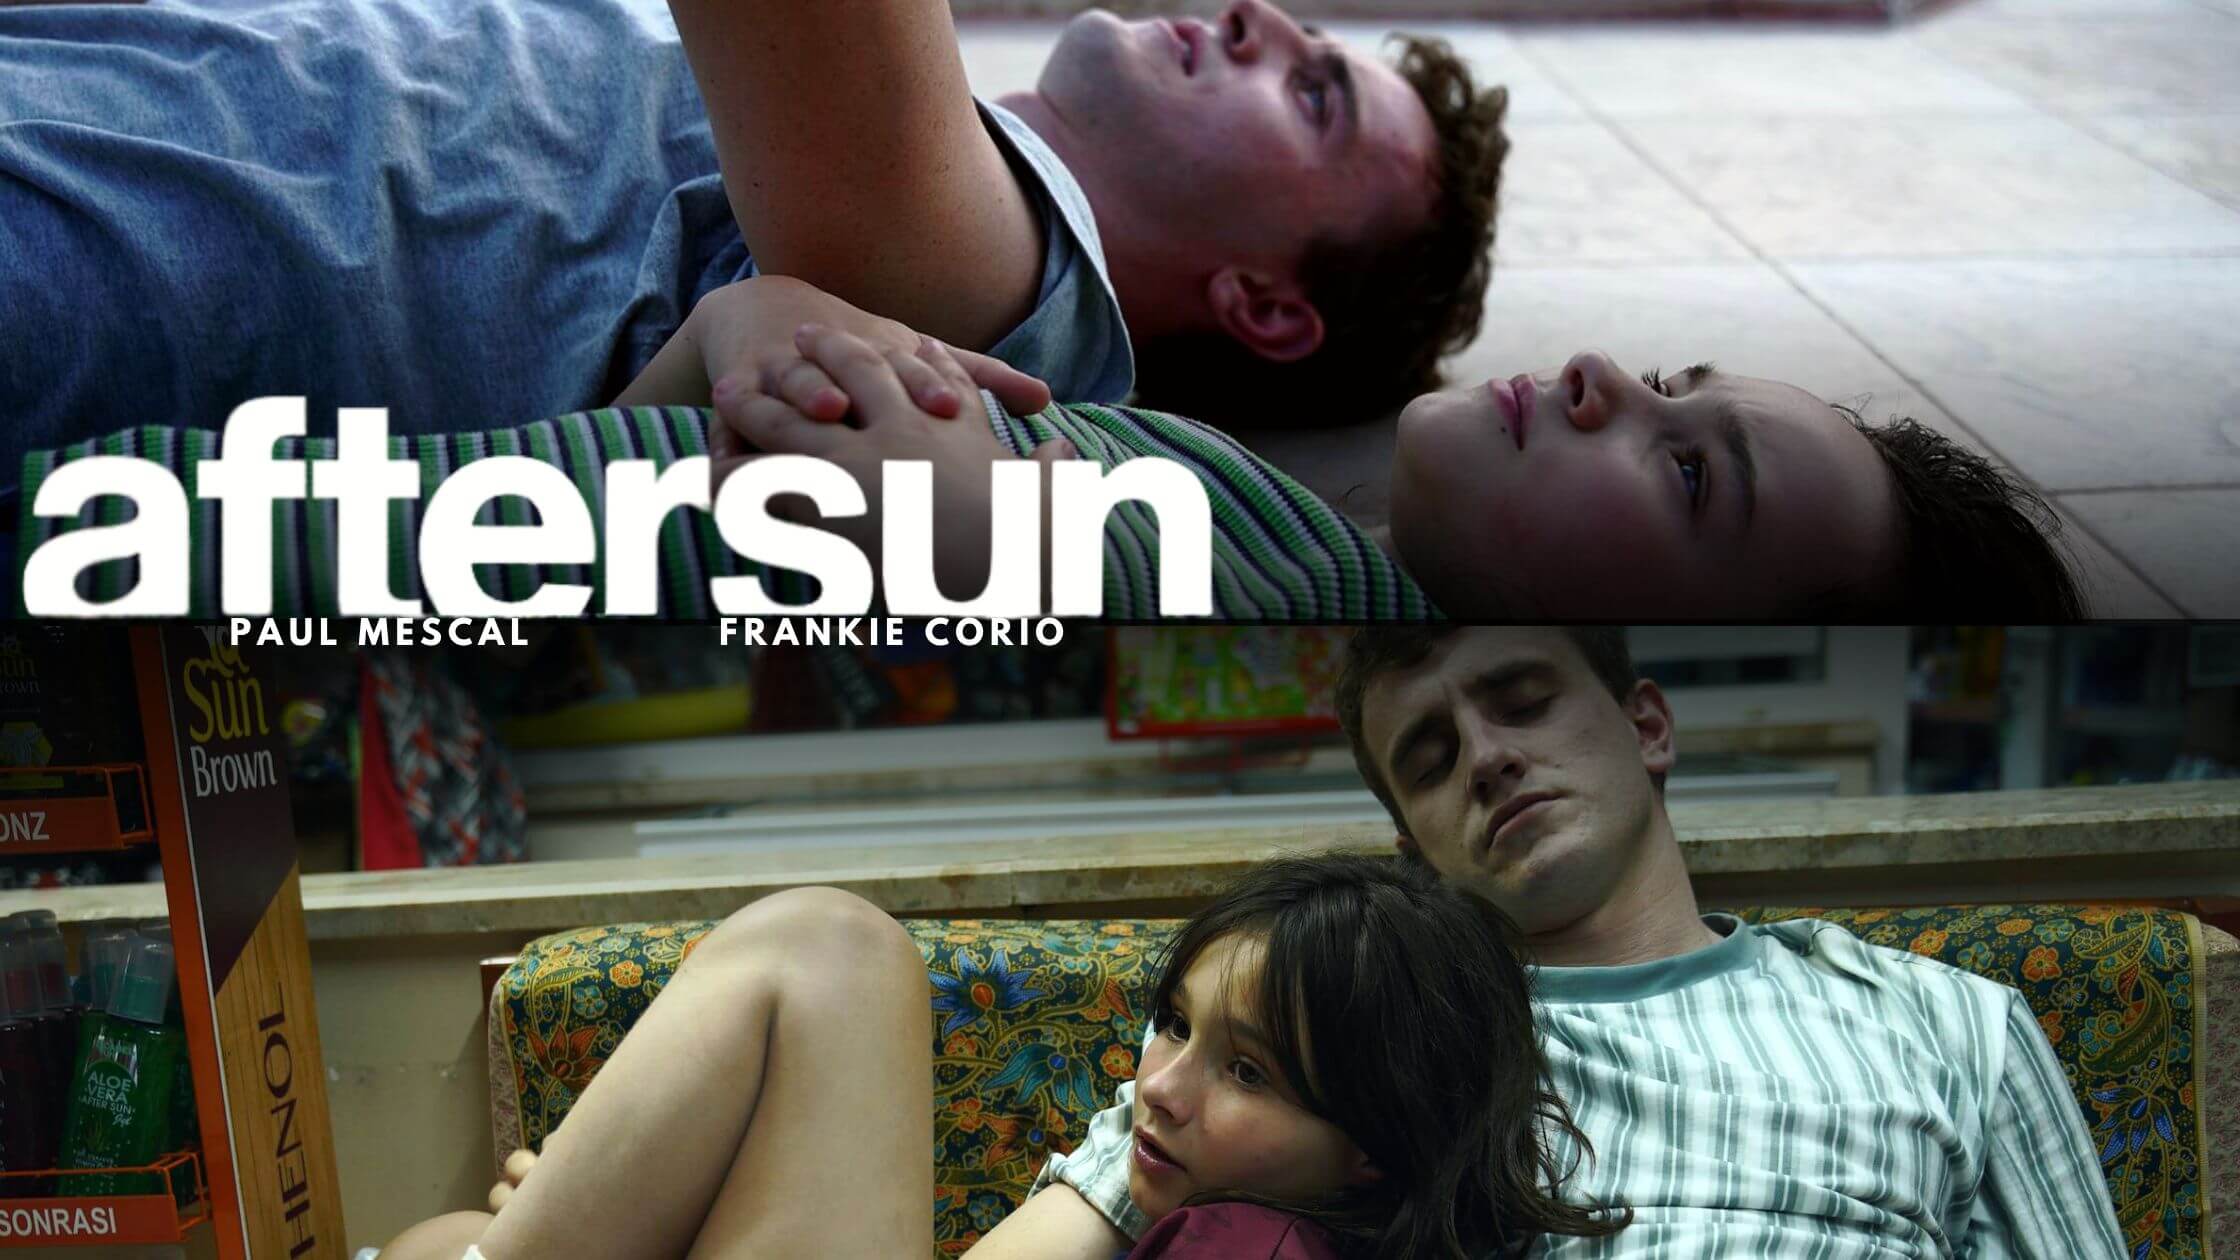 Paul Mescal and Frankie Corio in Aftersun